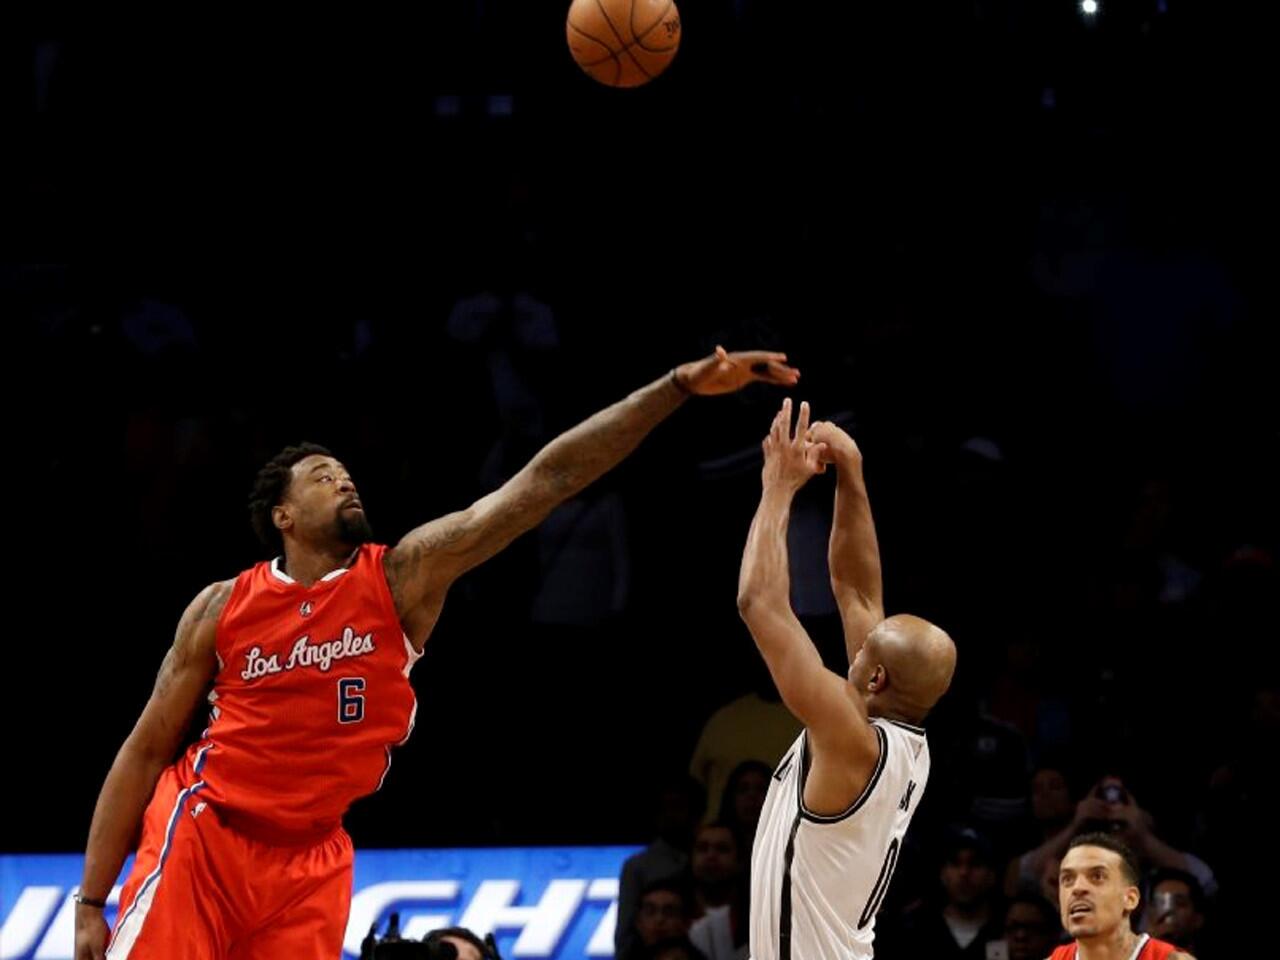 Nets guard Jarrett Jack hoists a rainbow shot over the outstretched hand of Clippers center DeAndre Jordan in the final seconds of the Nets' 102-100 victory.